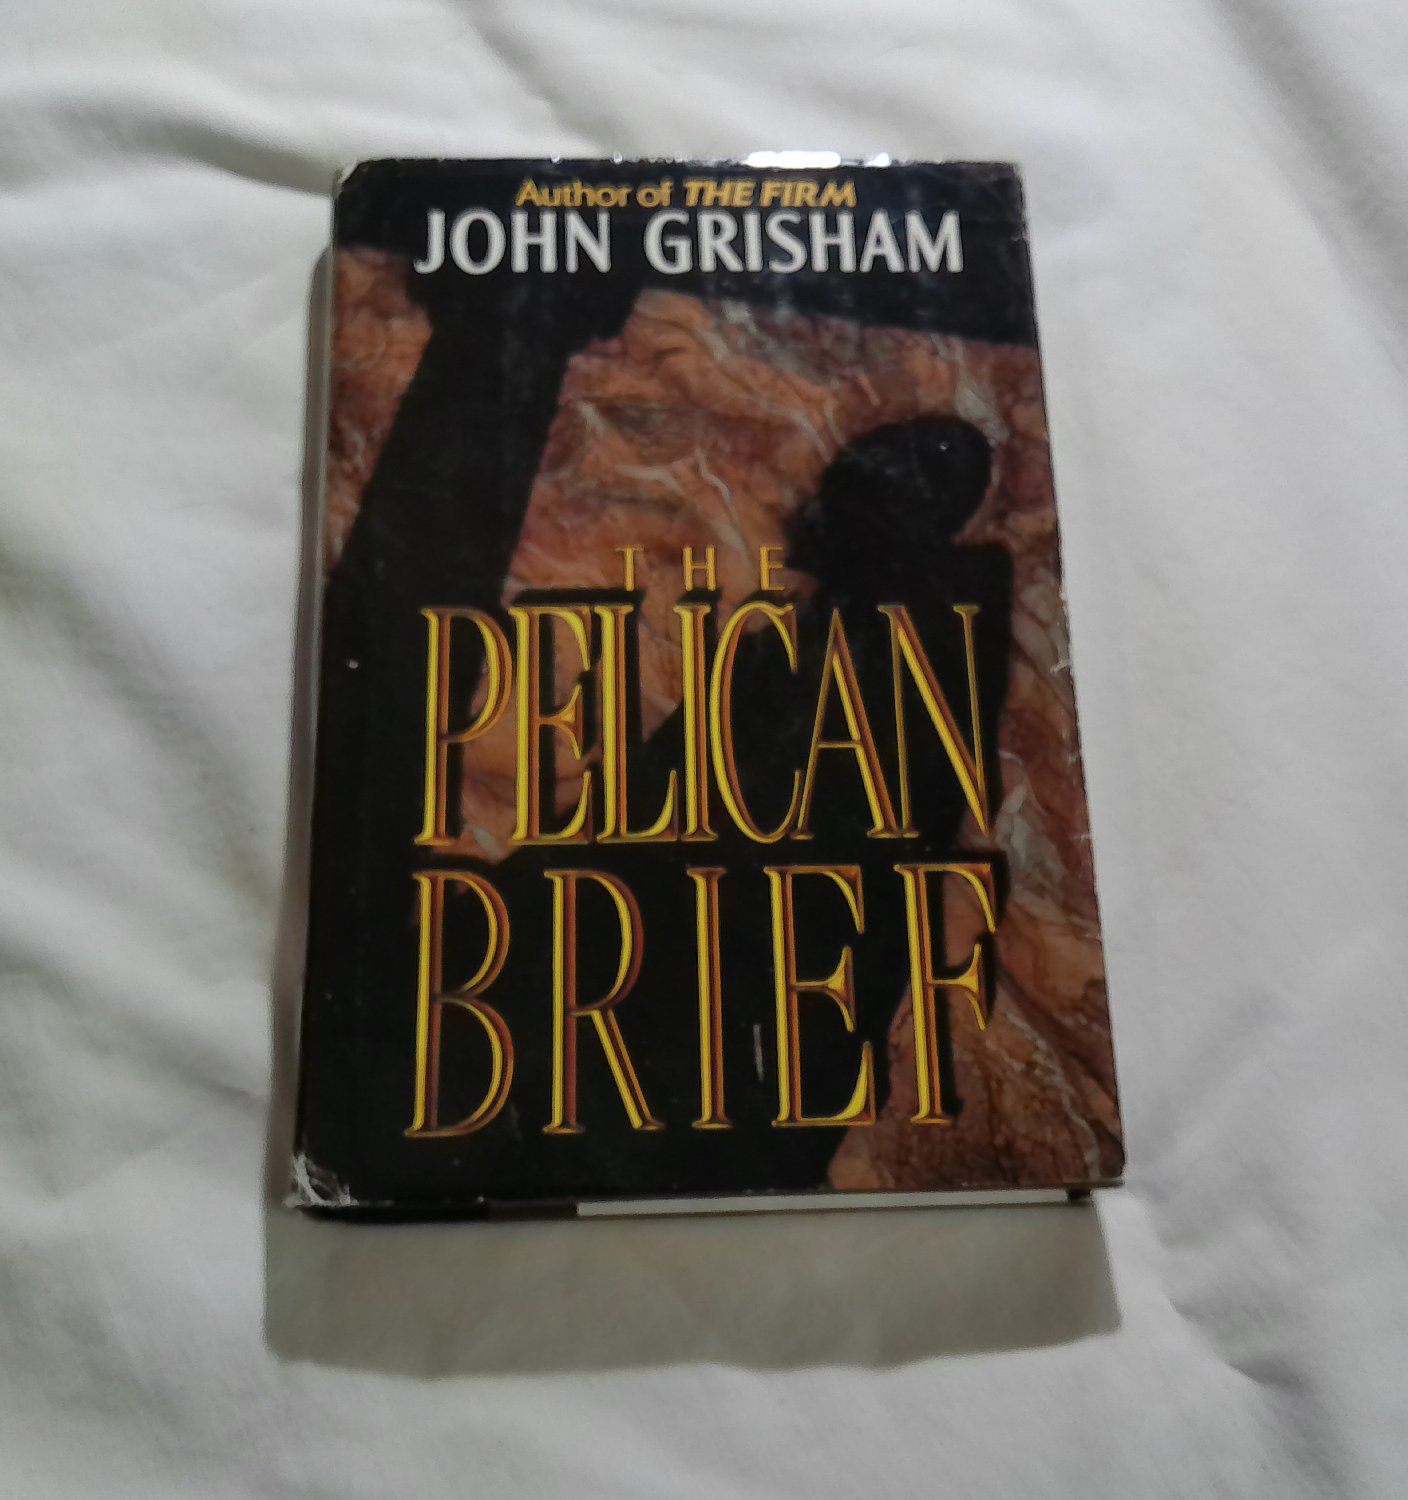 The Pelican Brief by John Grisham (1992) (189) Mystery, Thriller, Crime